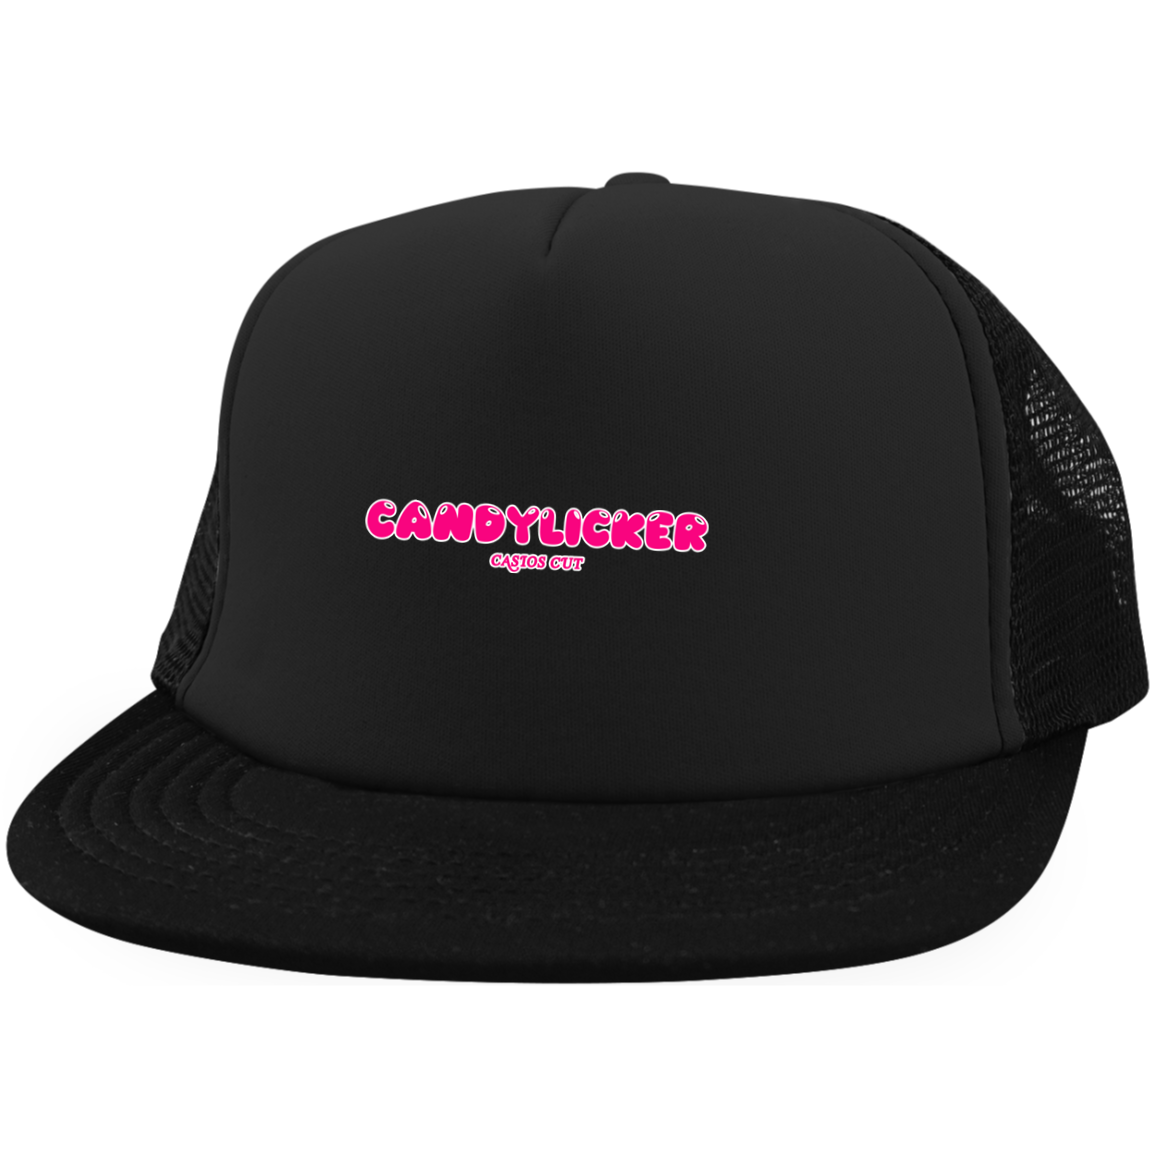 CandyLicker Trucker Hat with Snapback